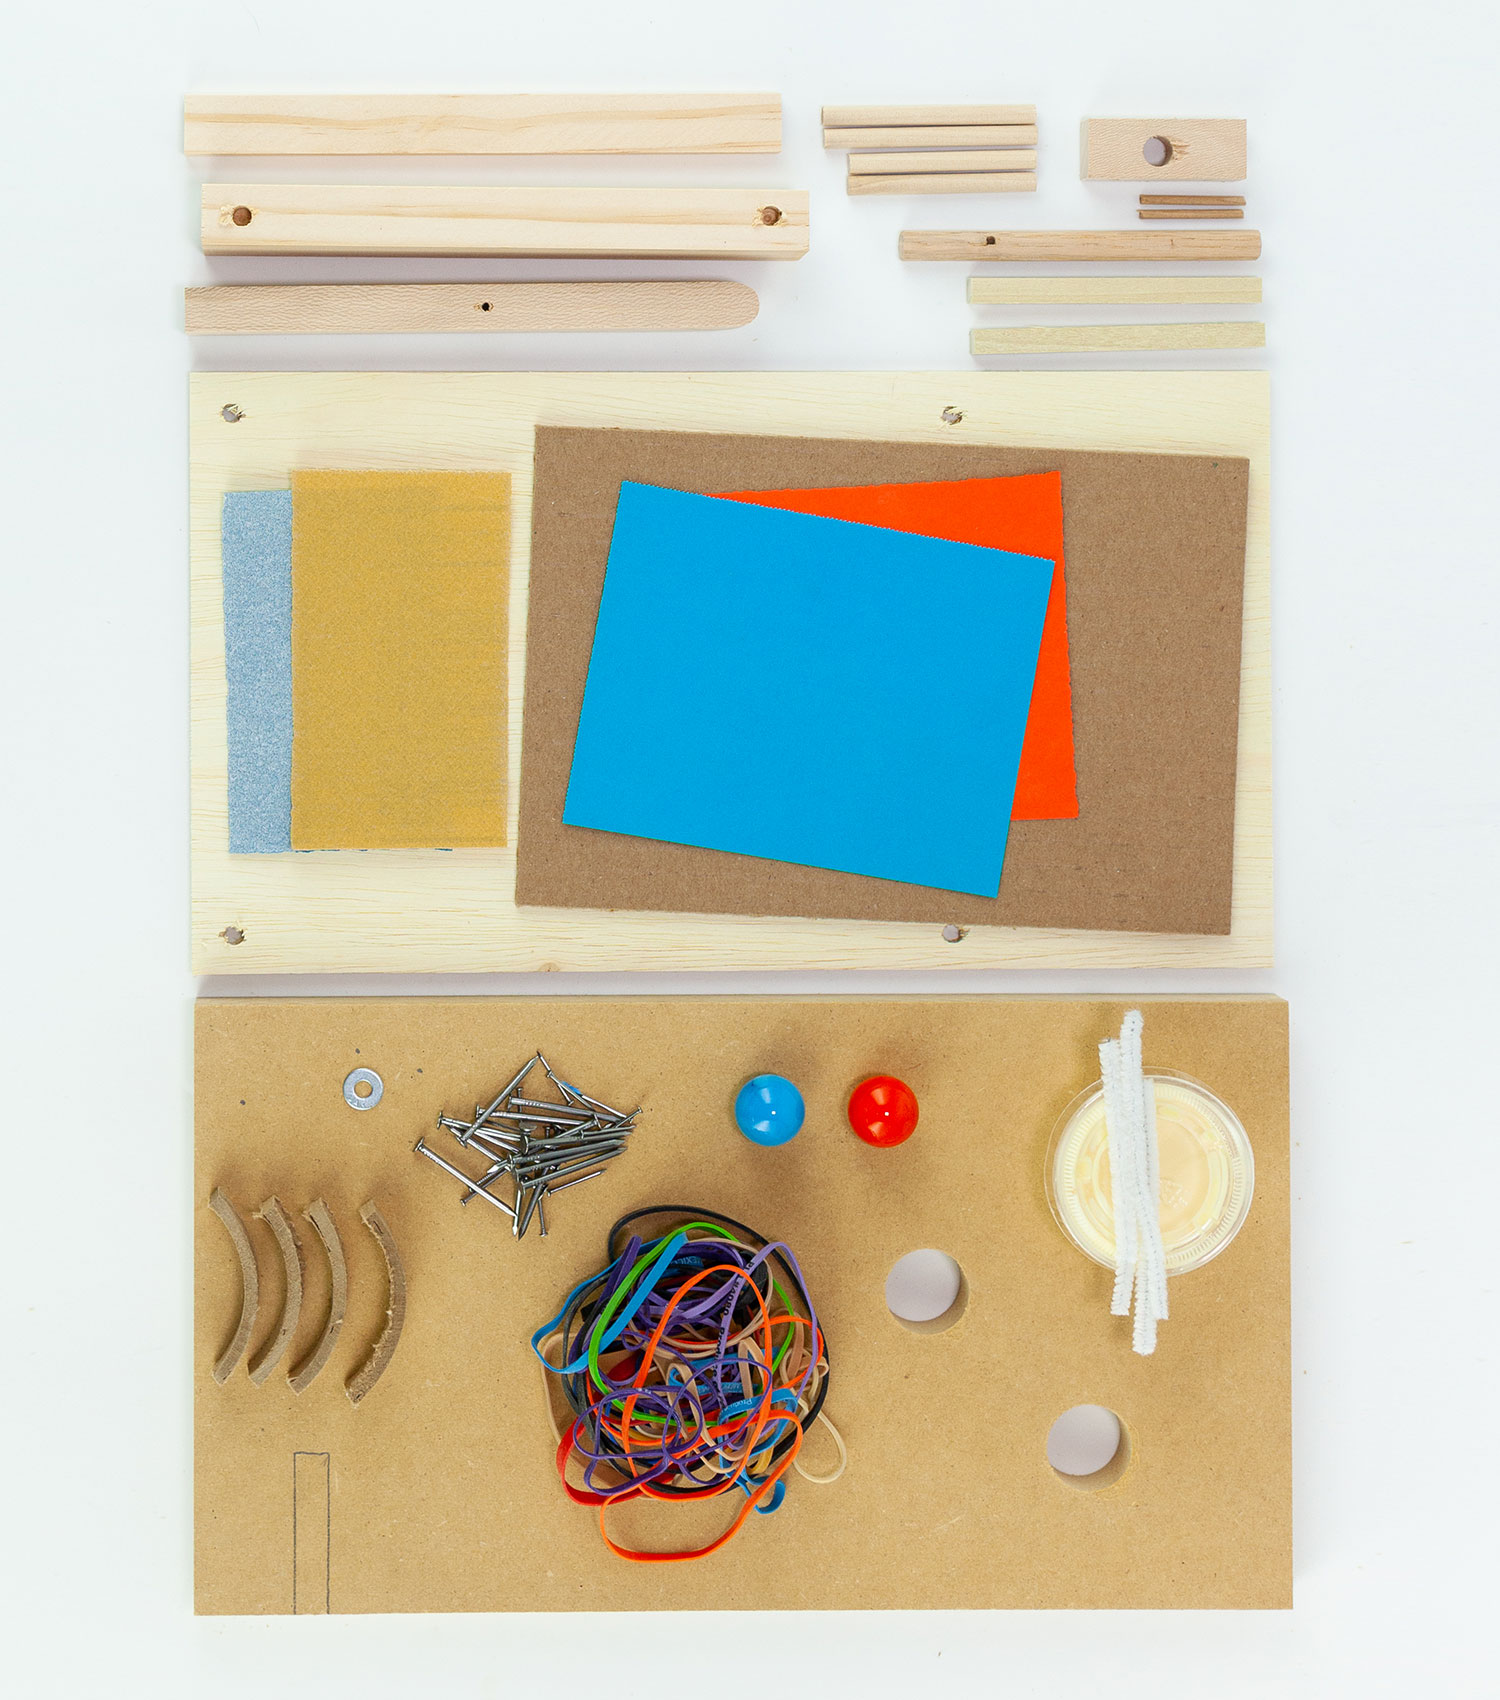 Wooden components to be assembled into a fun project kit. On mouseover: An assembled Marble Maze kit